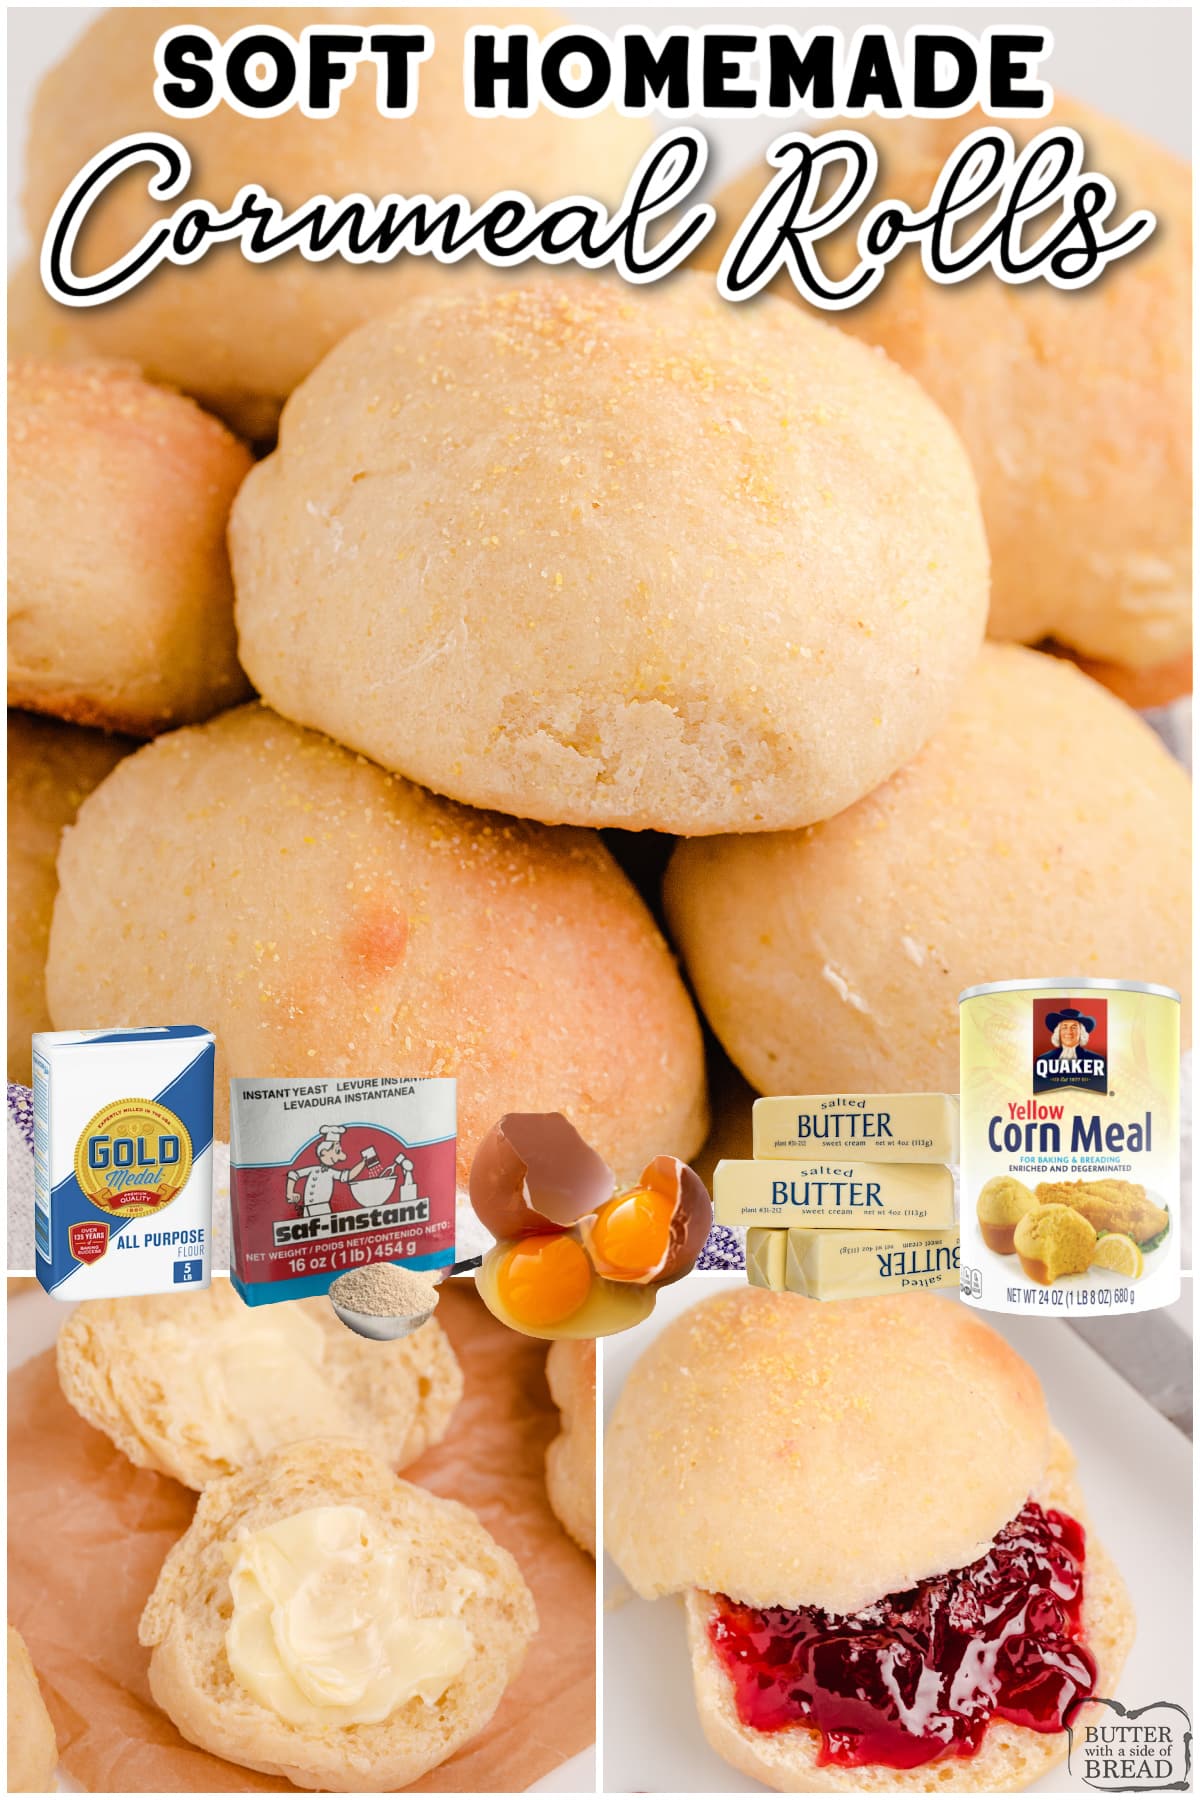 Soft Cornmeal Rolls are fluffy homemade dinner rolls with incredible flavor!  Yeast rolls with cornmeal have a chewy texture and are perfect served with butter & jam! 